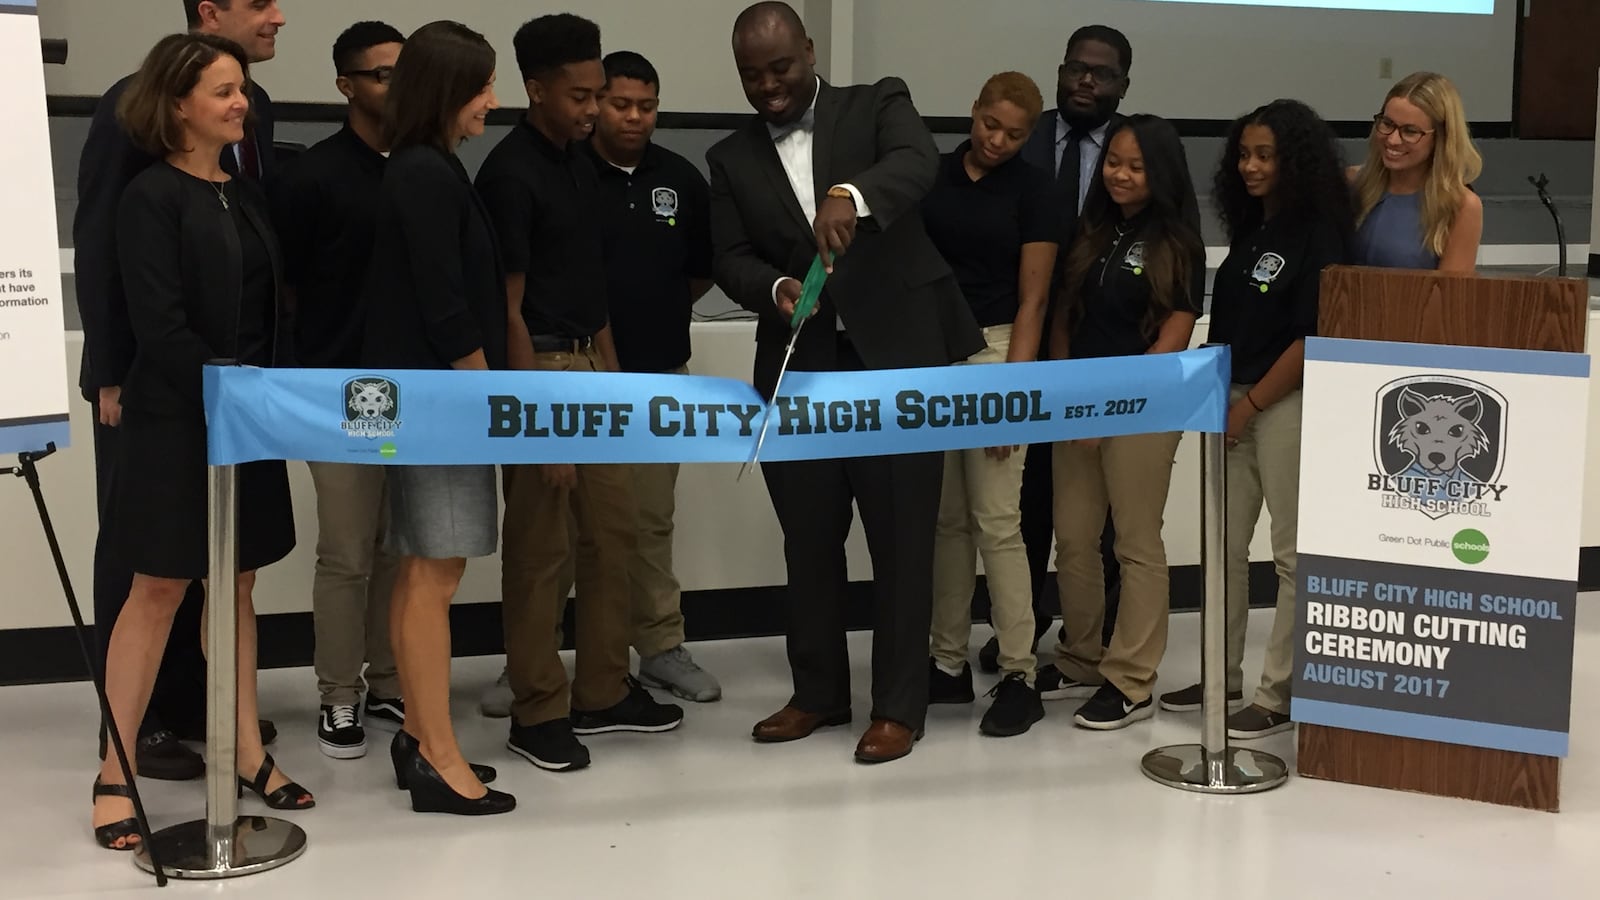 Principal Jonas Cleaves cuts the ribbon at Bluff Hills High School's opening day ceremony. He is surrounded by students, faculty and leaders of Green Dot and the State Board of Education.